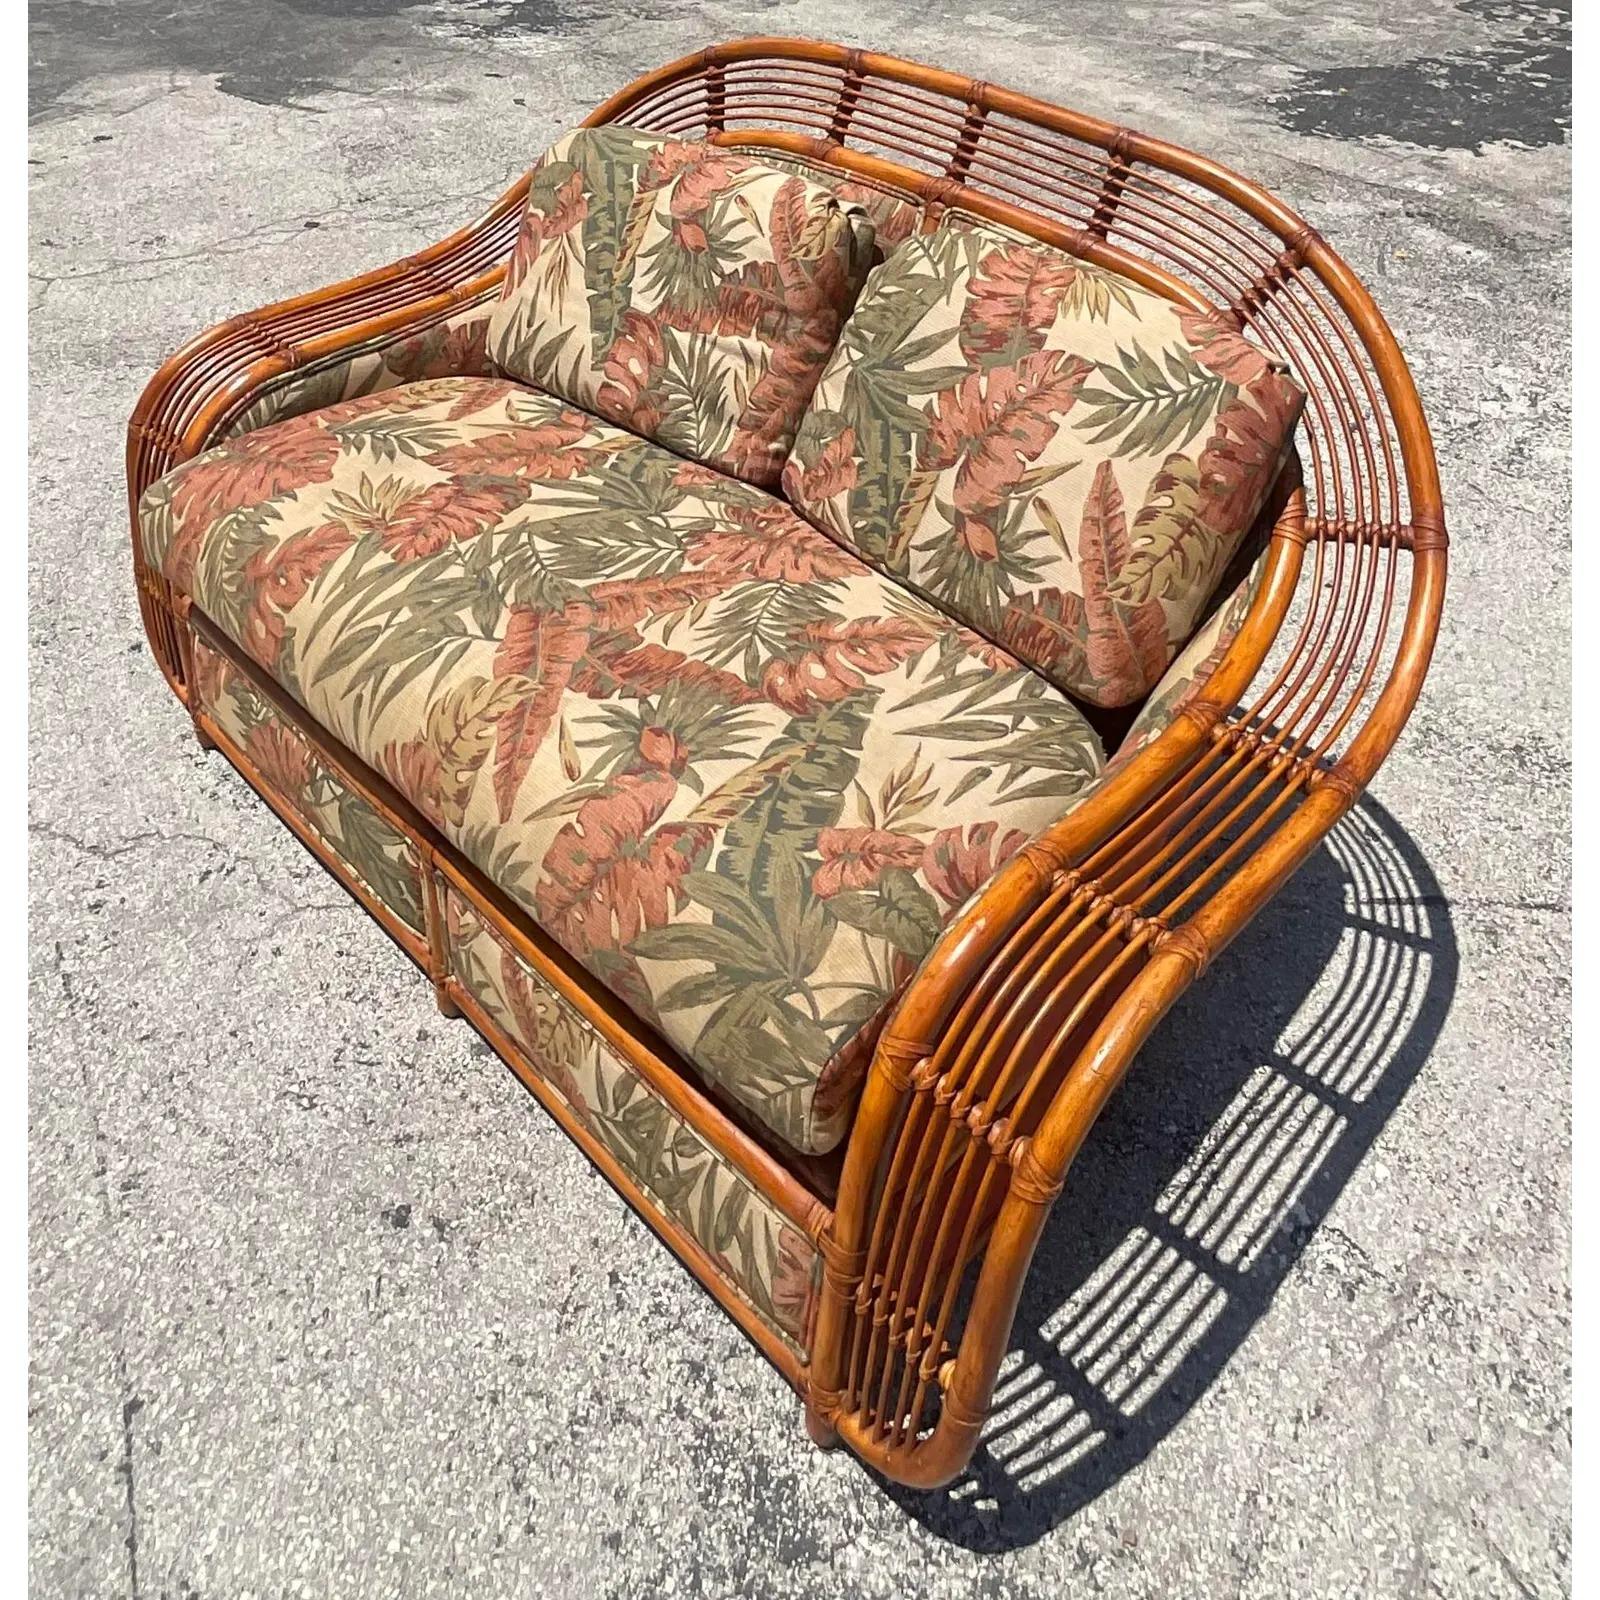 An incredible pair of vintage Coastal rattan sofa and chair. Made by the iconic Henry Olko for Willow and Reed. Part of the coveted Brielle series. Unmarked. Acquired from a Palm Beach estate.